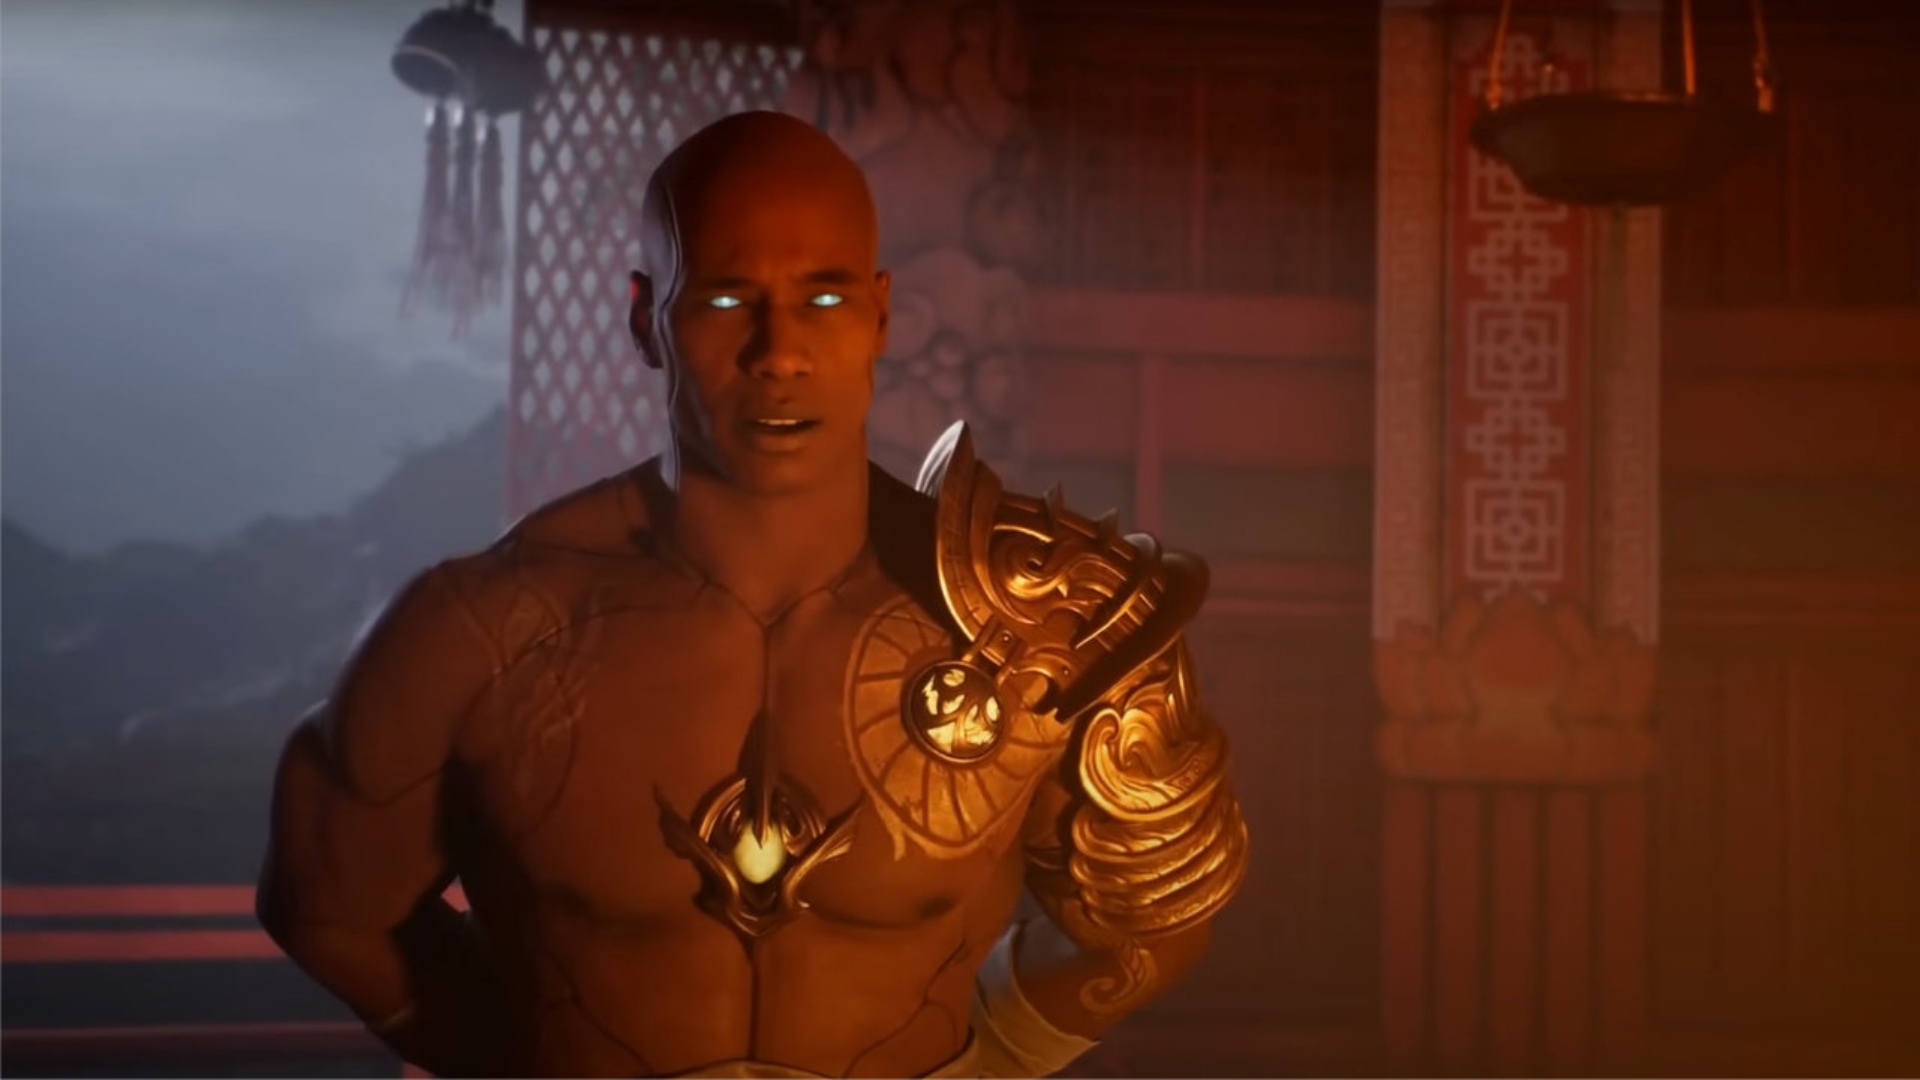 Don't get your hopes up for cross-play in Mortal Kombat 1 at launch